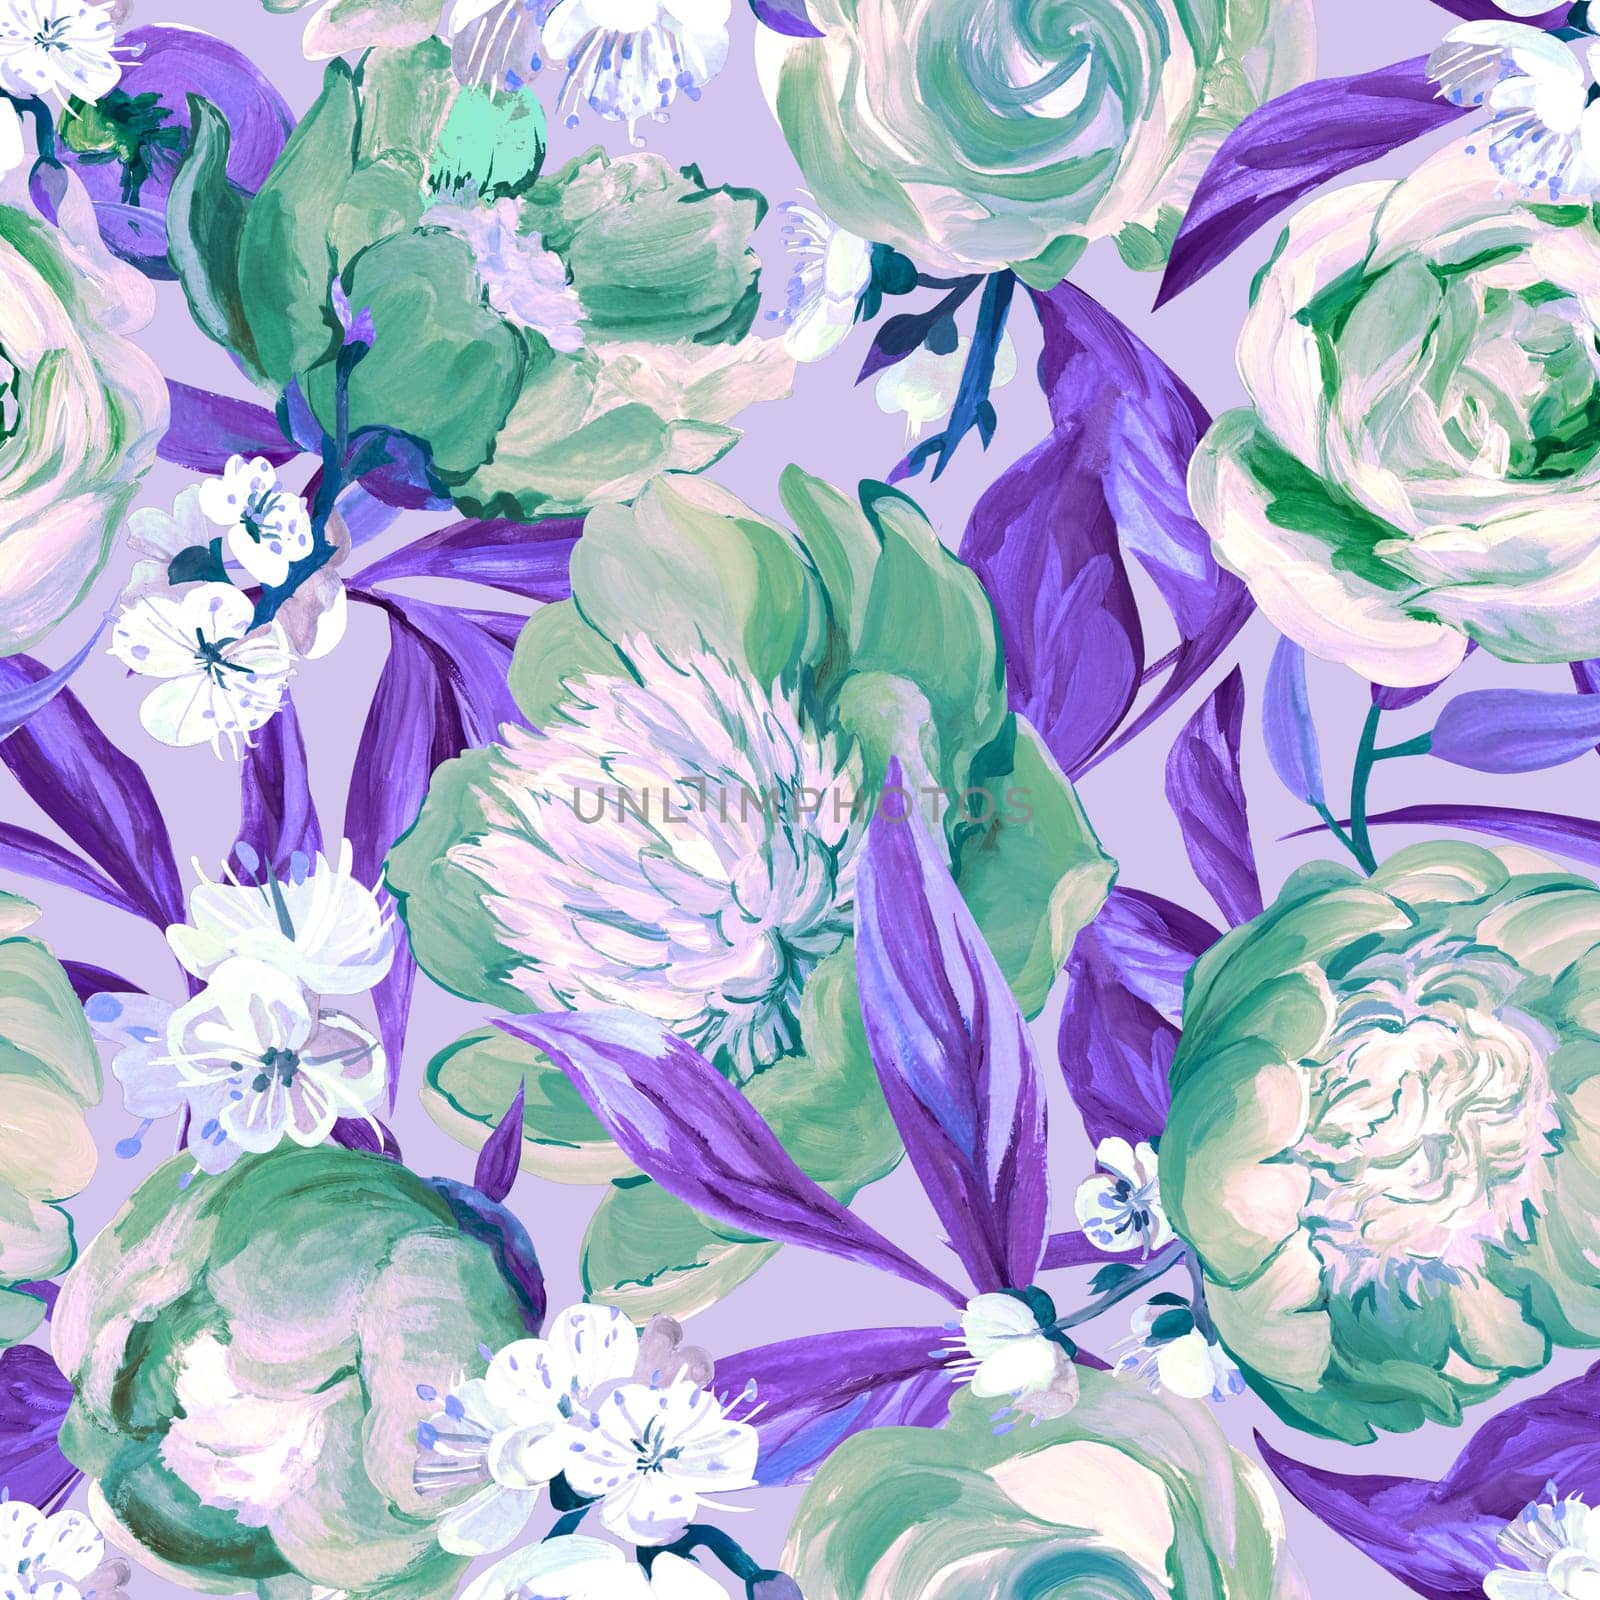 Botanical seamless pattern with peonies and sakura branches drawn in gouache by MarinaVoyush